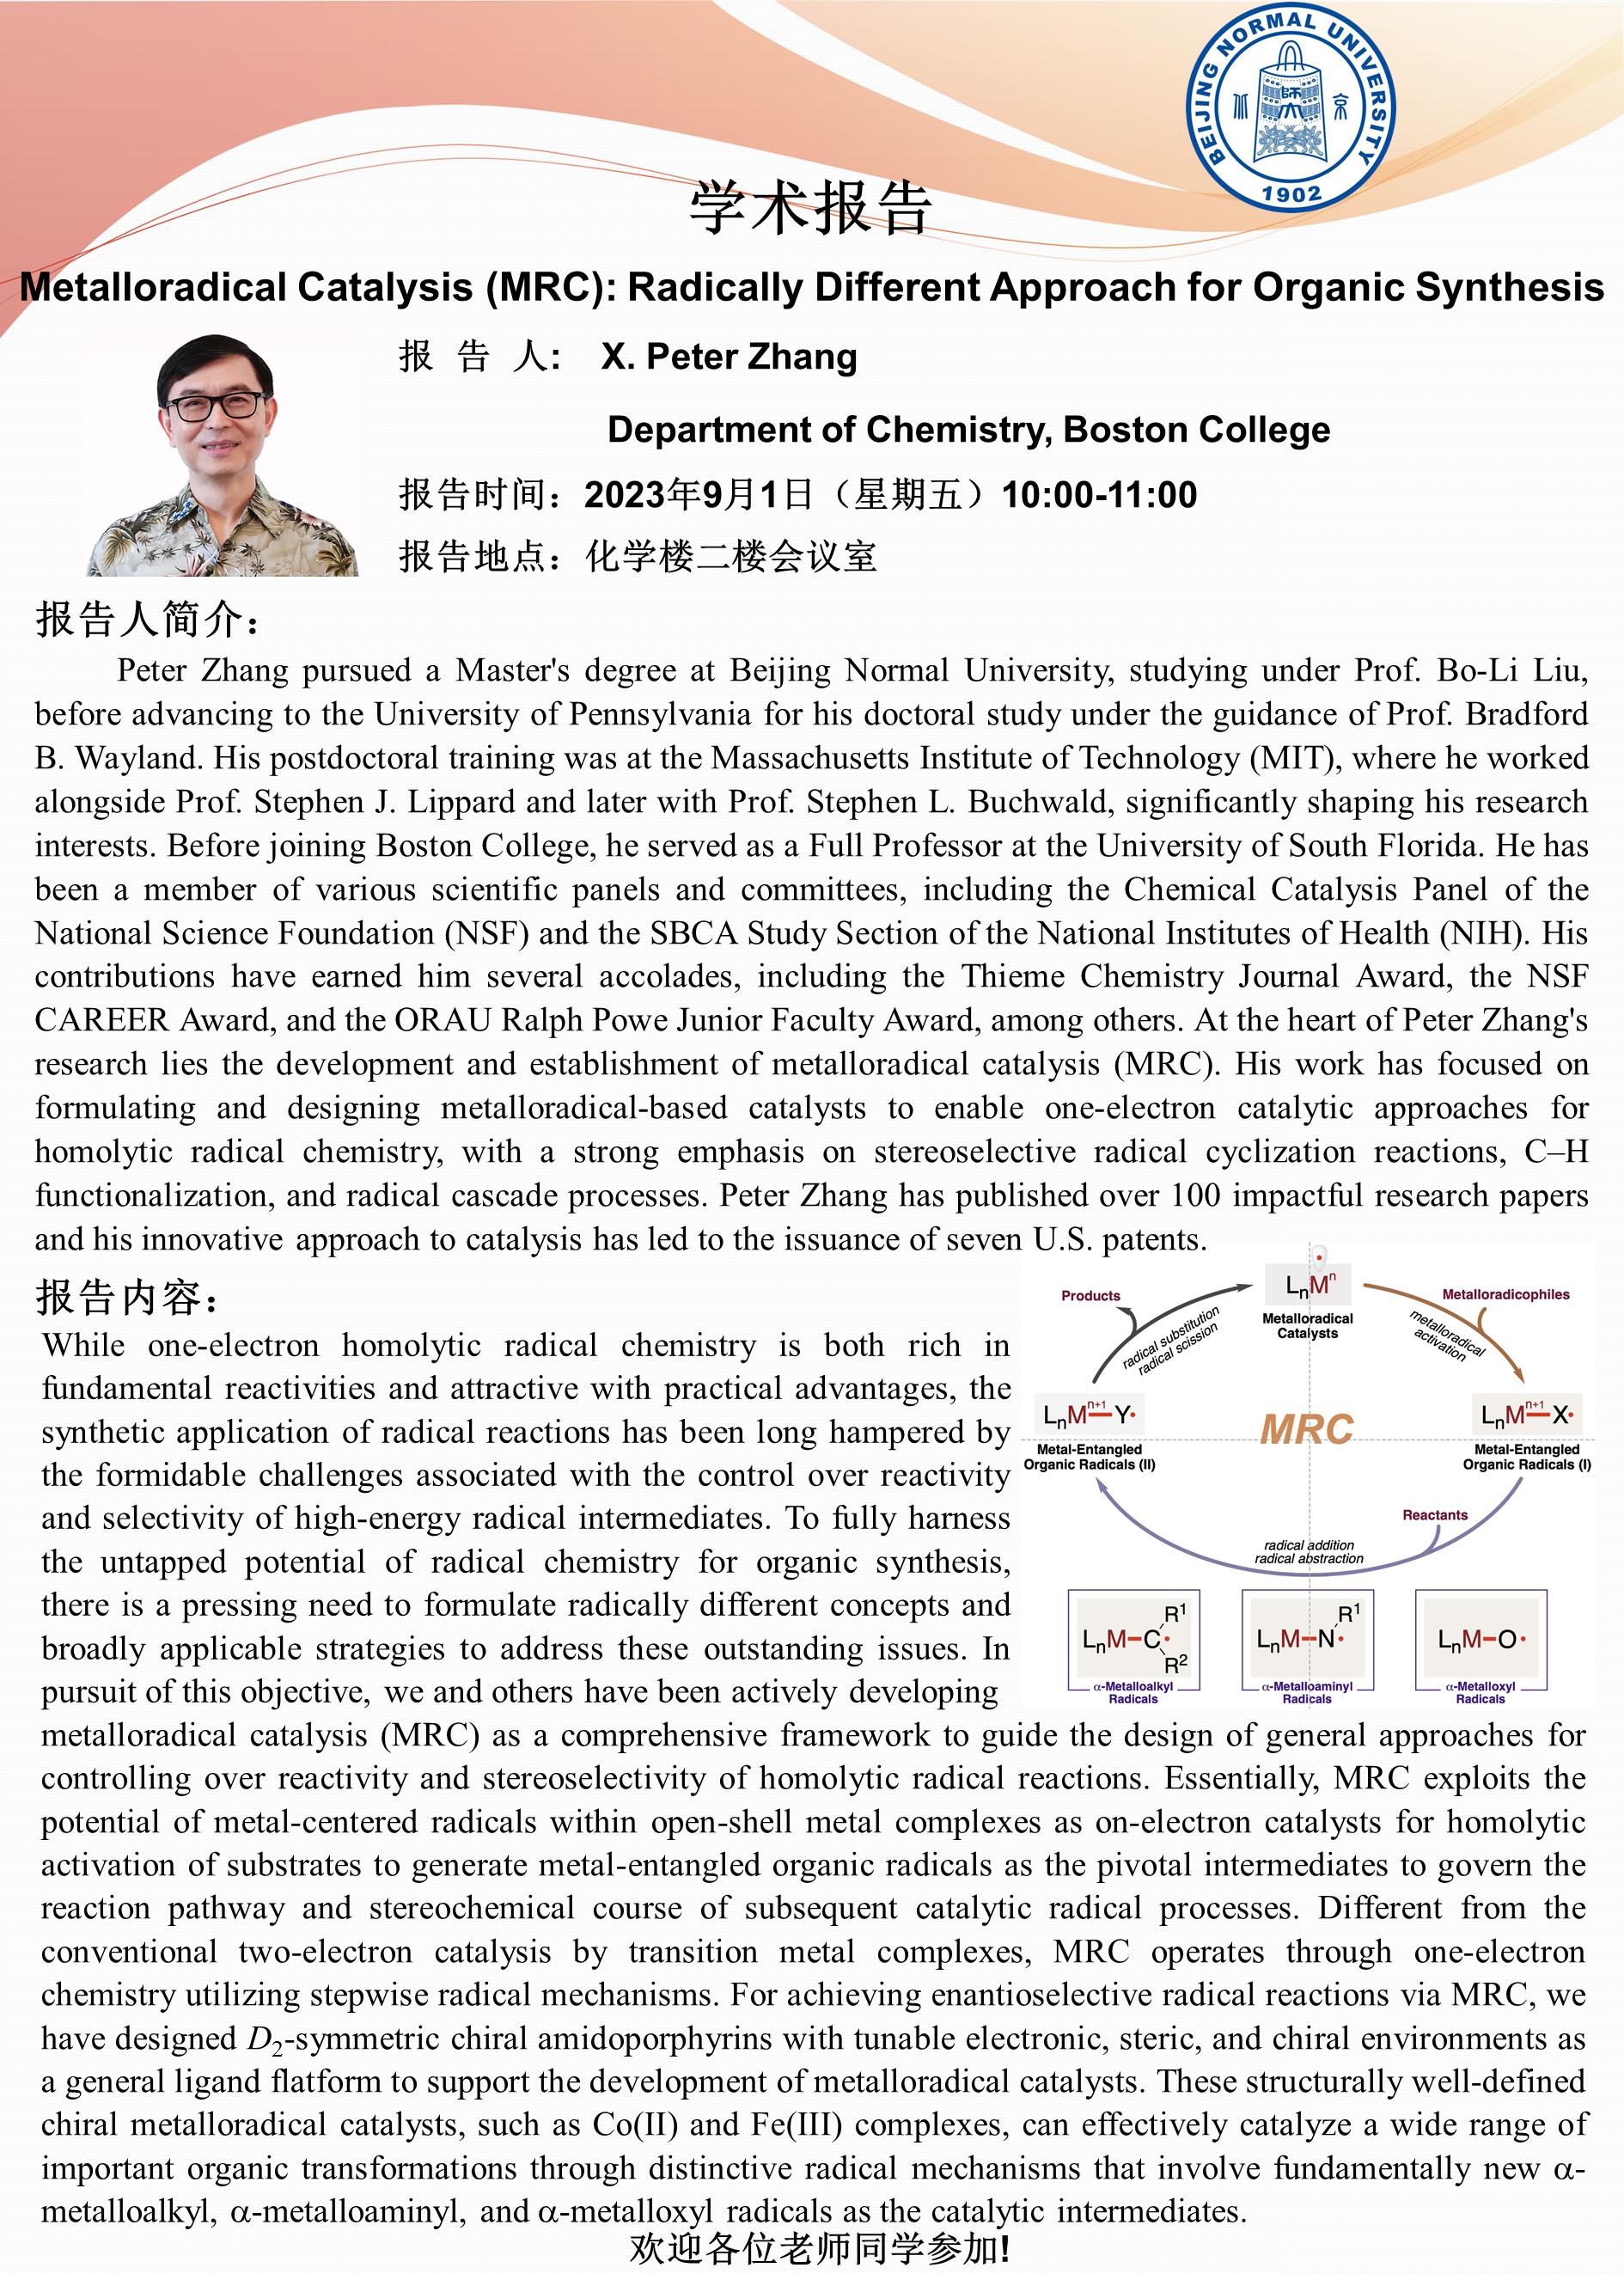 Peter Zhang-Metalloradical Catalysis (MRC)-Radically Different Approach for Organic Synthesis.jpg